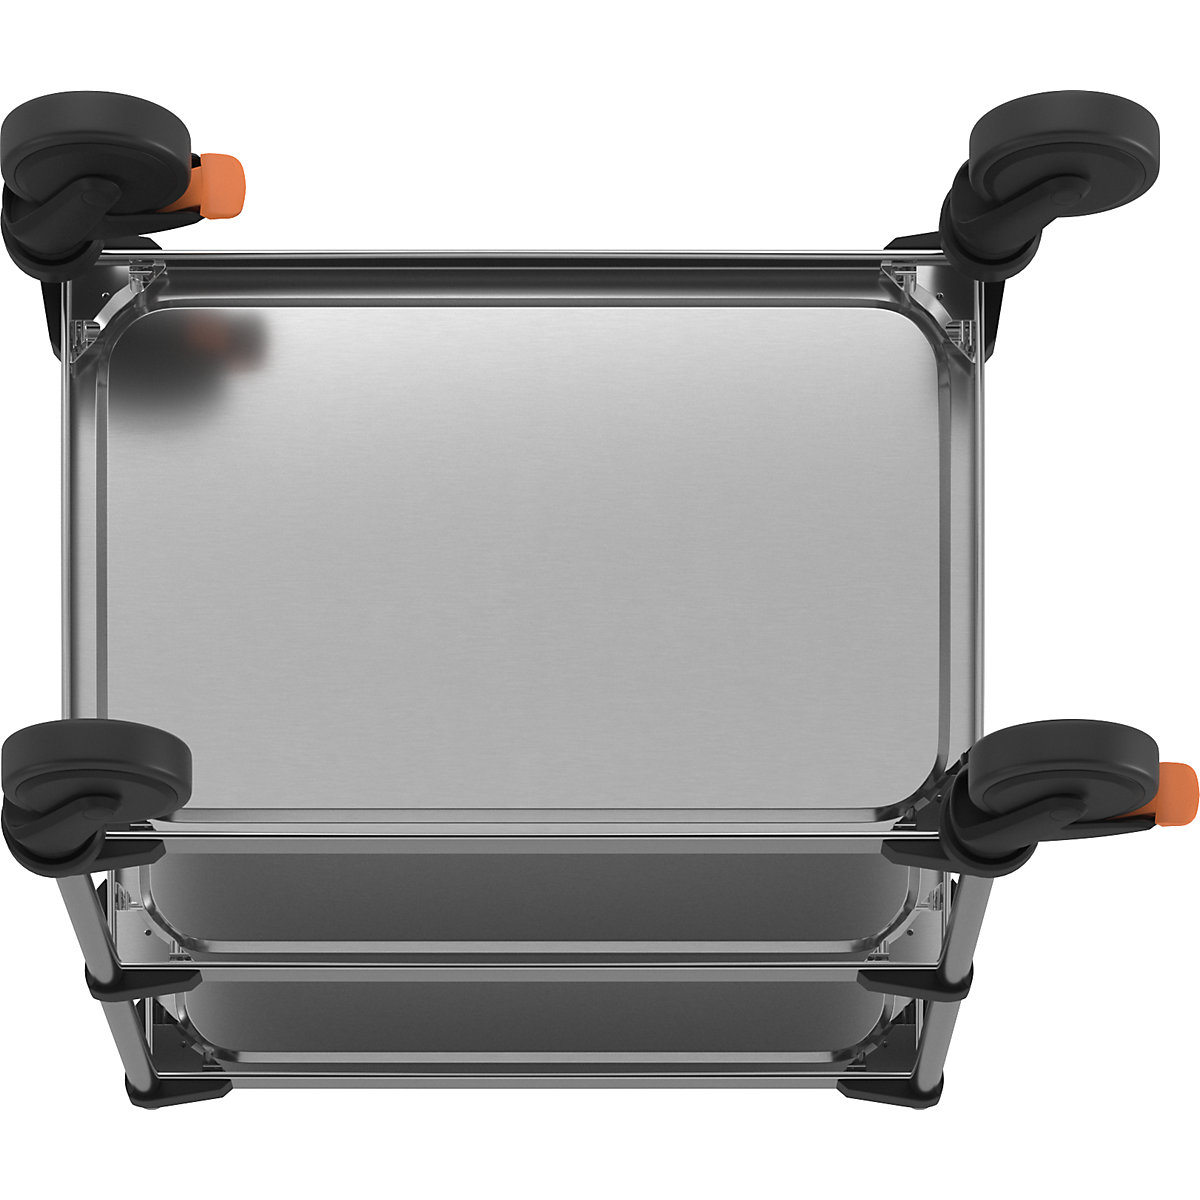 640-RL stainless steel serving trolley (Product illustration 3)-2